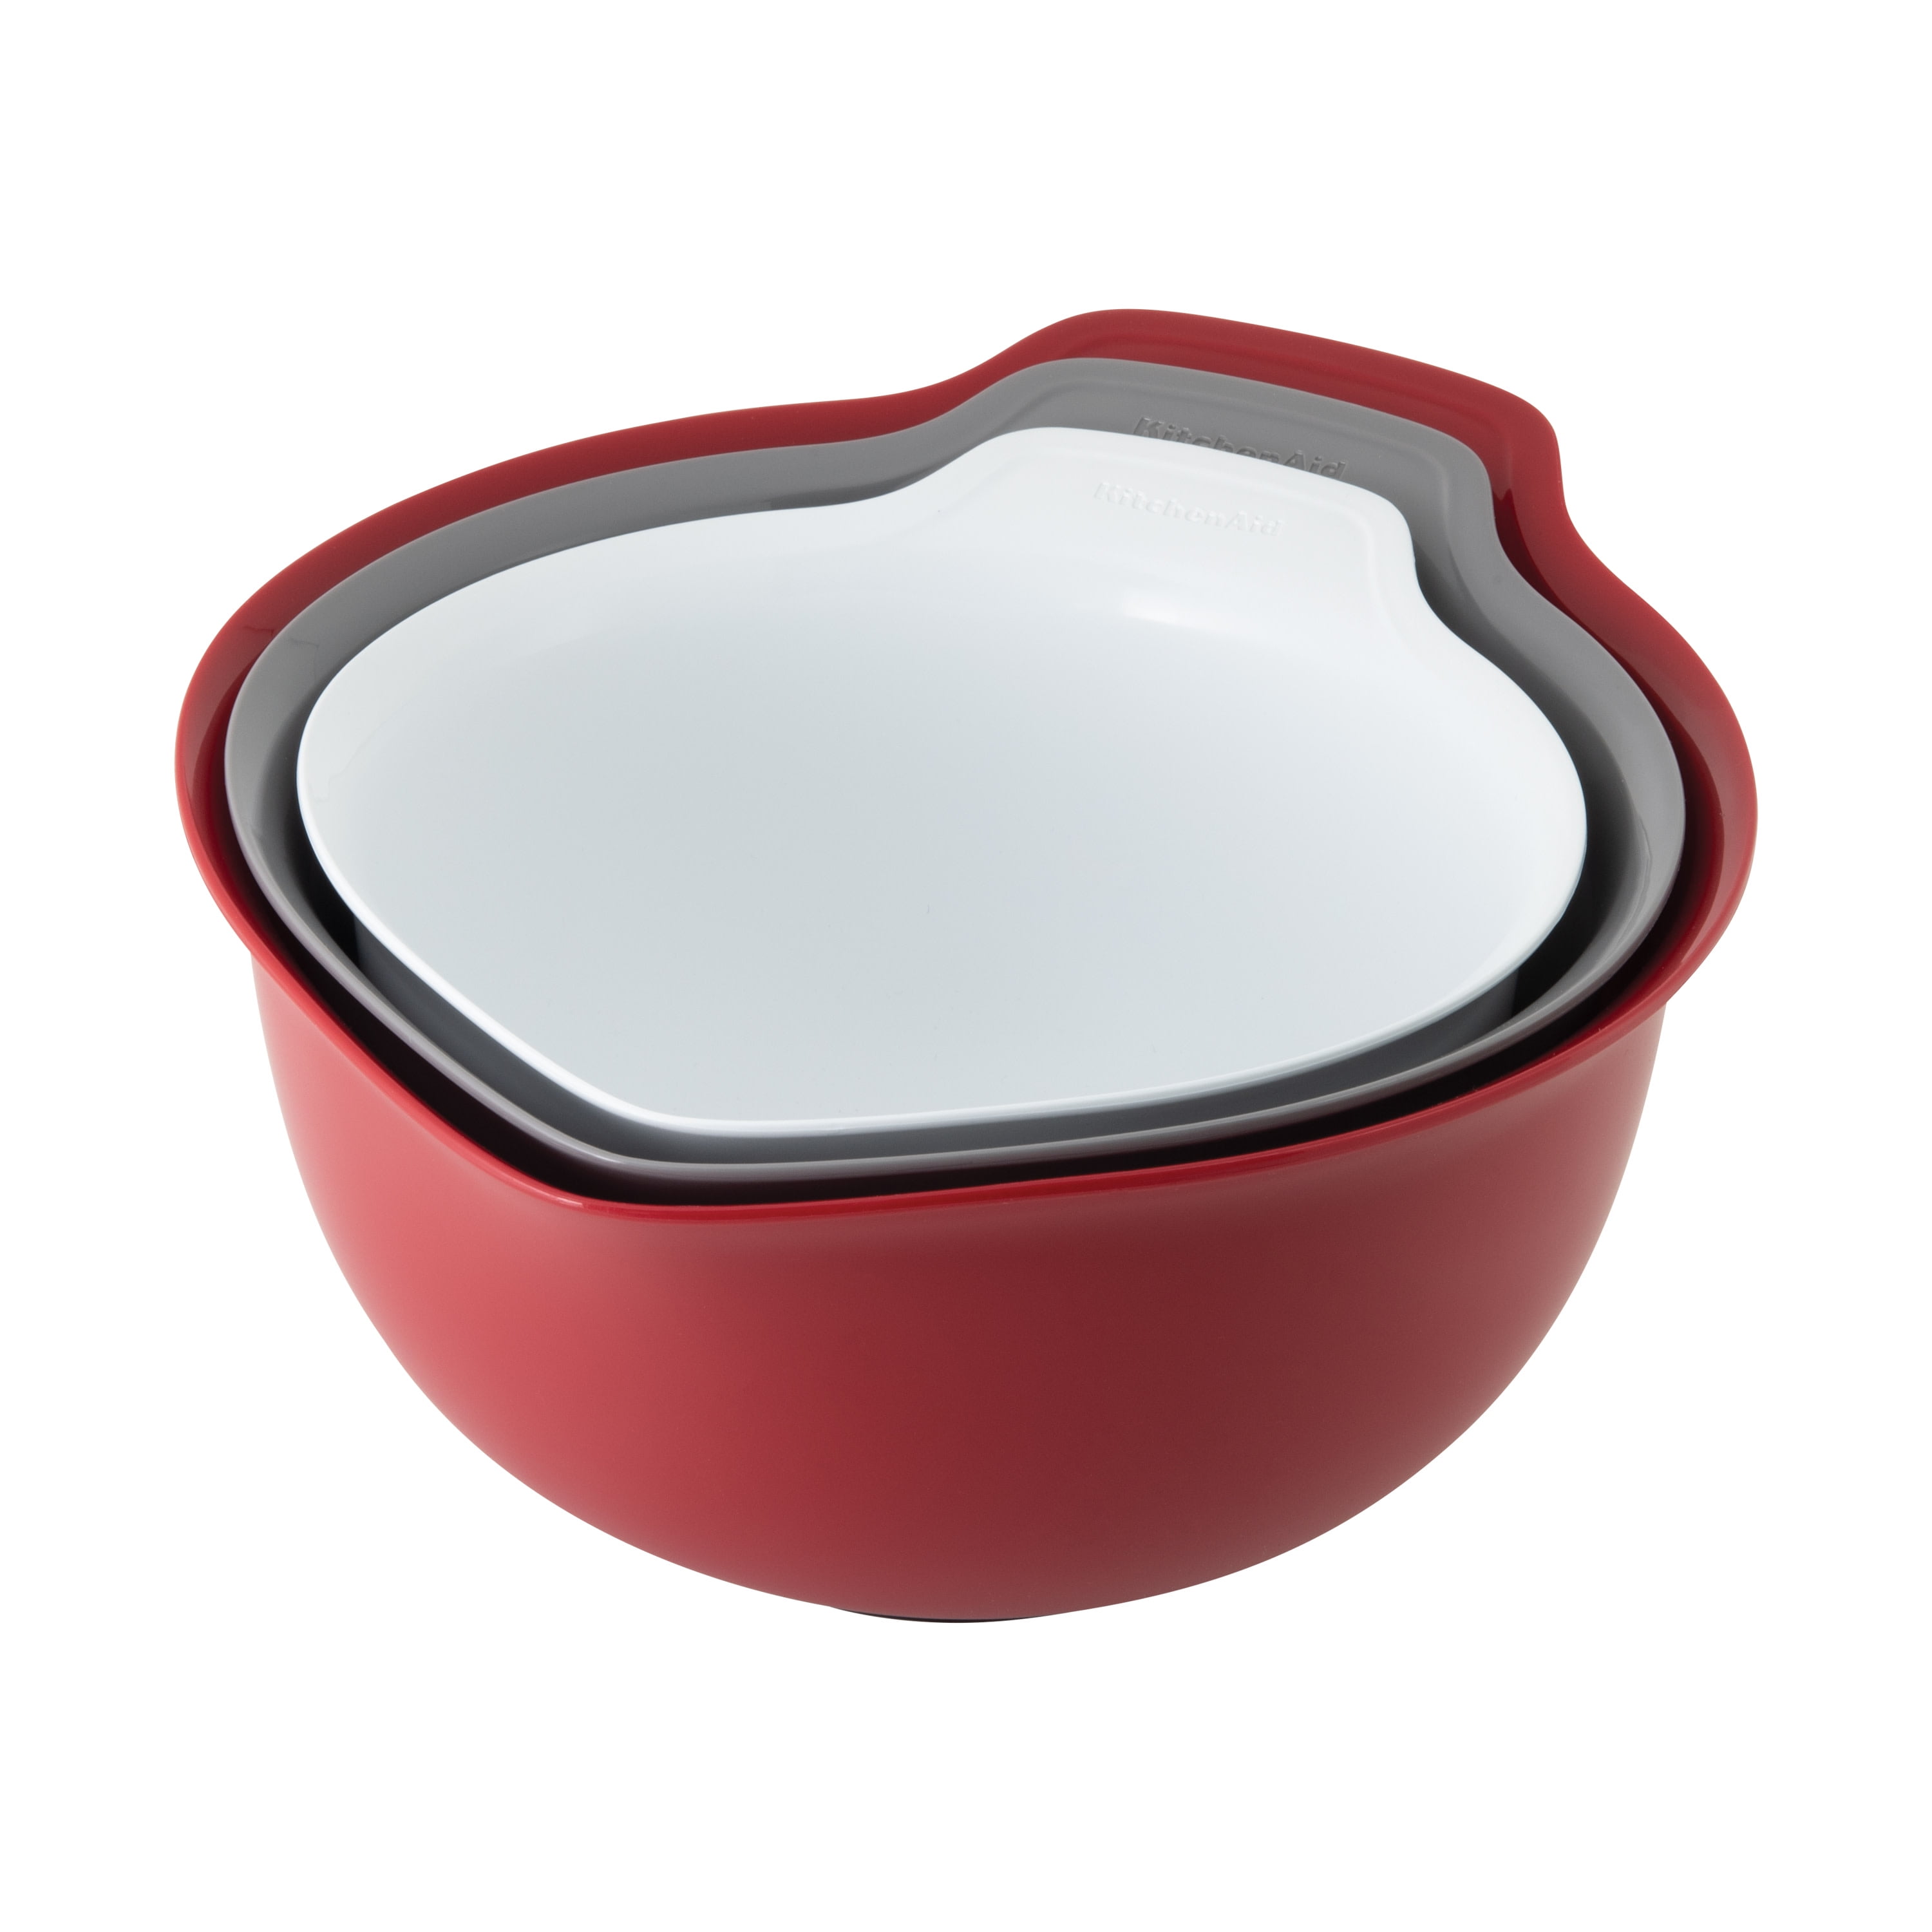 Mixing bowl without lid, 3,5 l, white - Westmark Shop